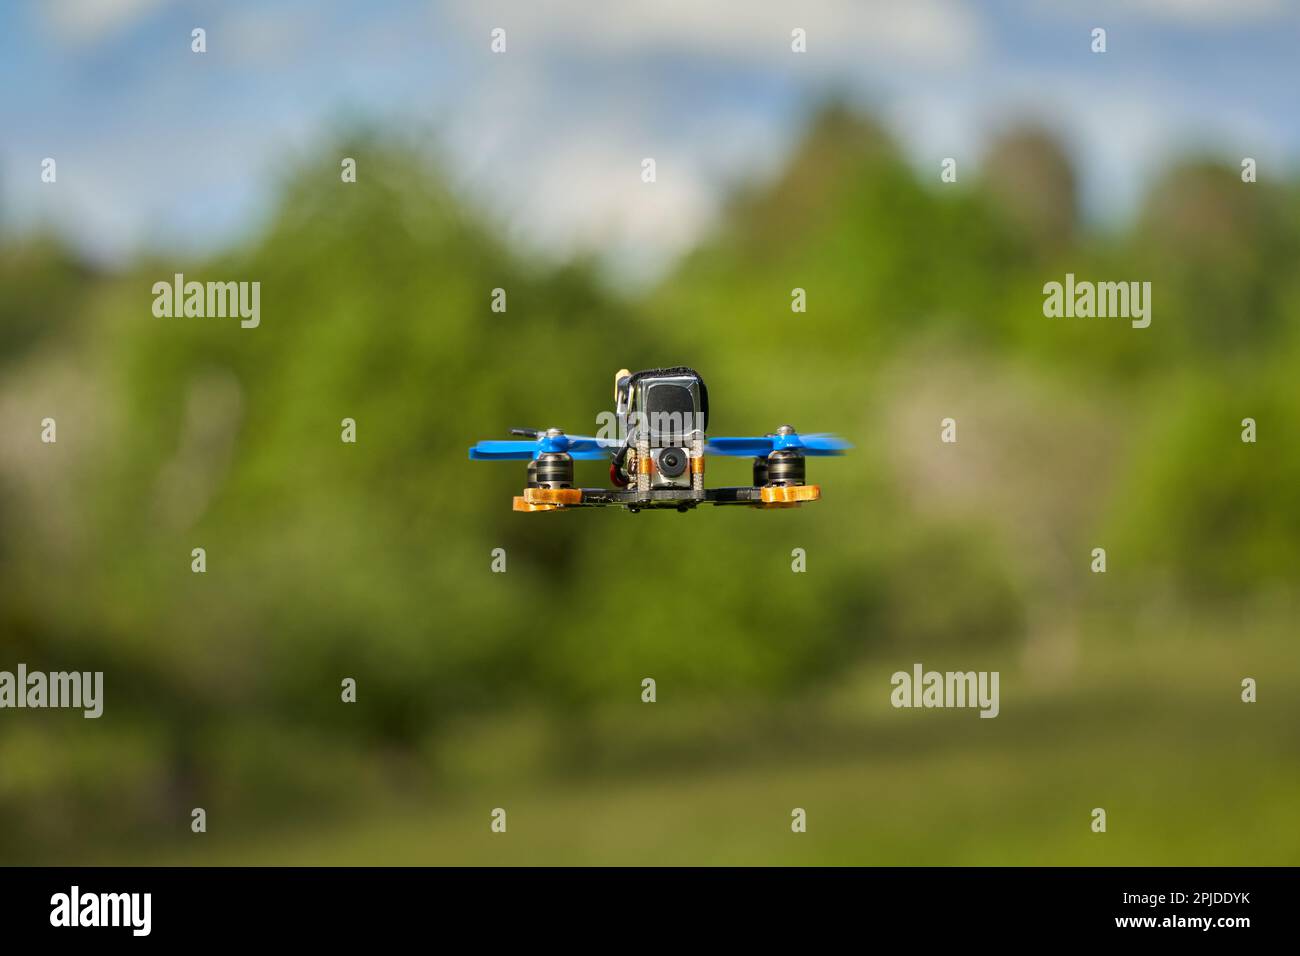 Tiny drone also racing copter with blue propeller over a green meadow. Trees and blue sky in the background. Stock Photo